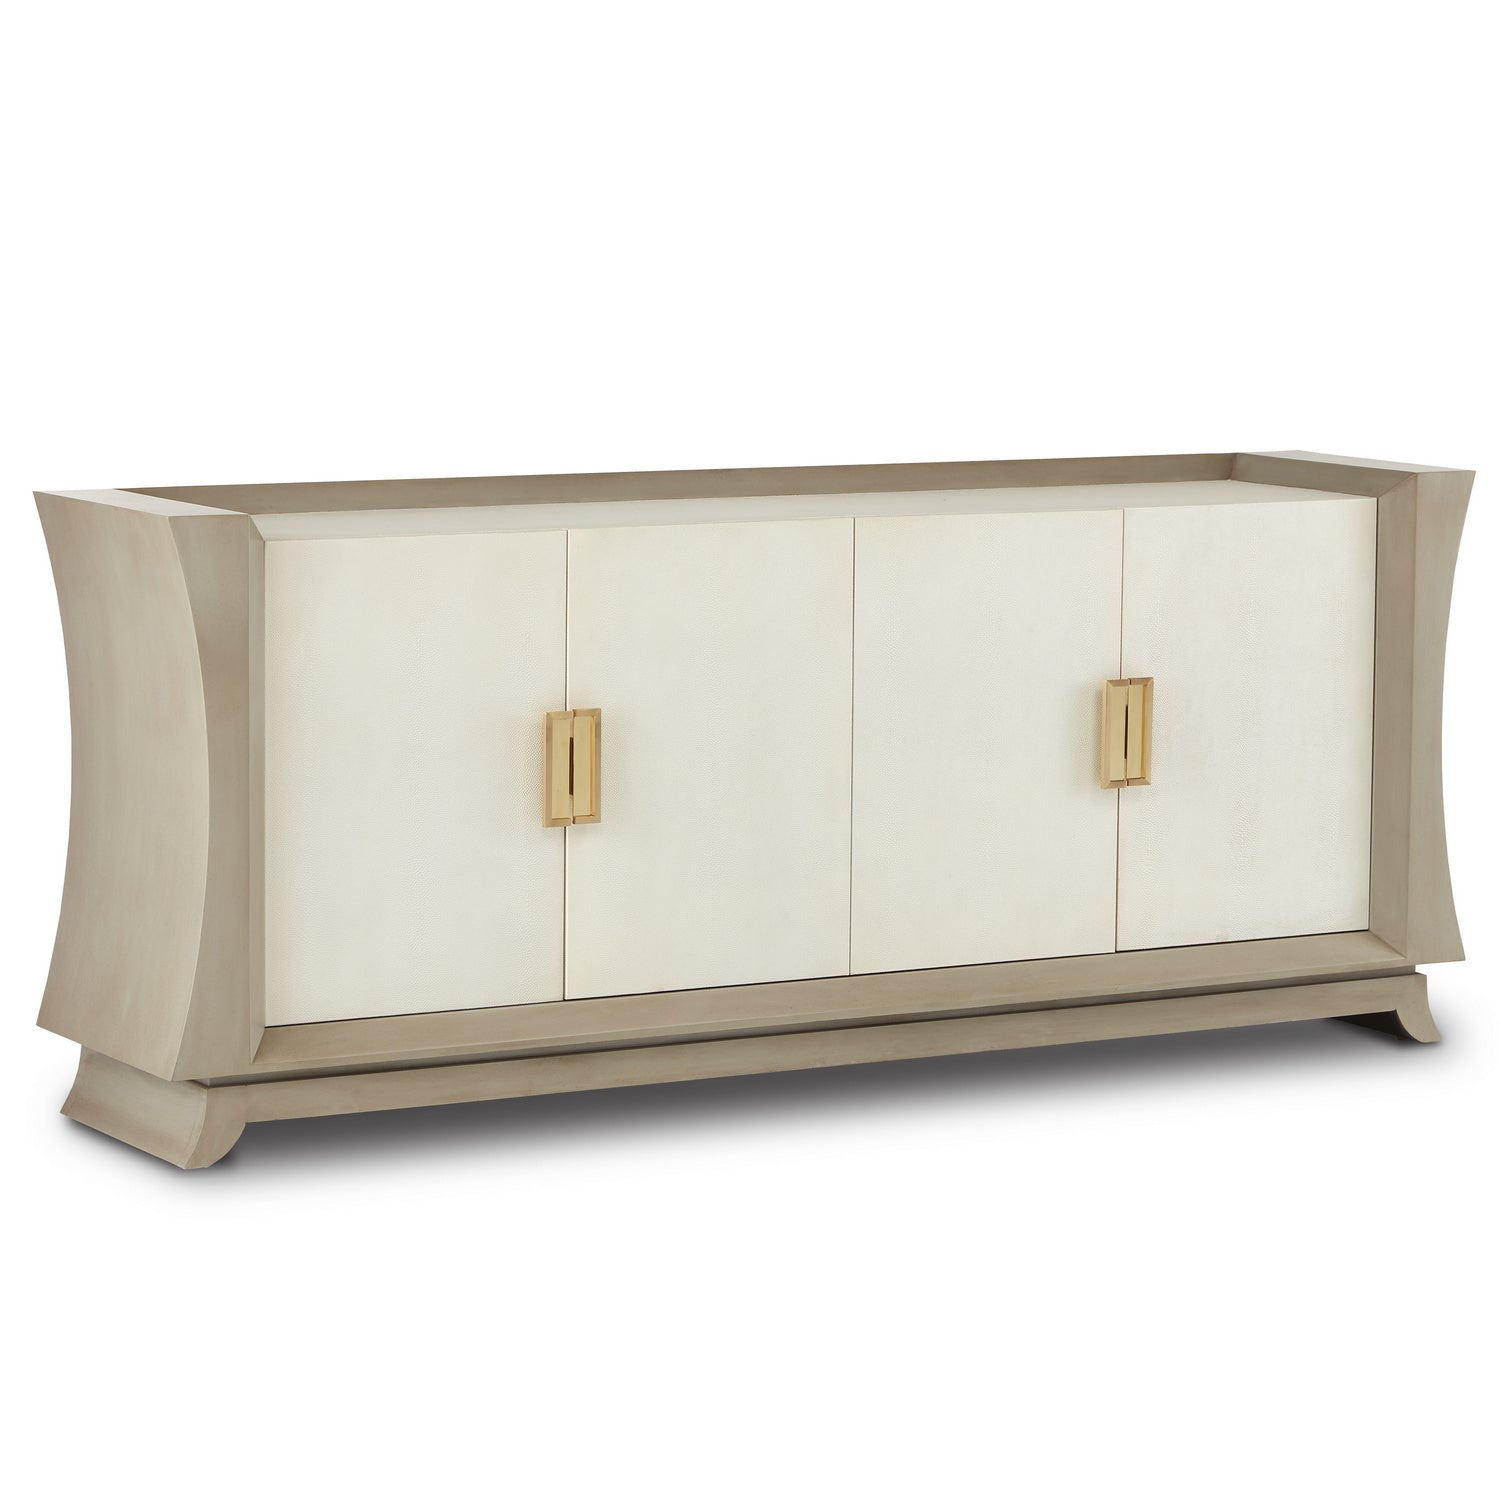 Currey and Company - Credenza - Barry Goralnick - Oyster Gray/Cream/Brushed Polished Brass- Union Lighting Luminaires Decor